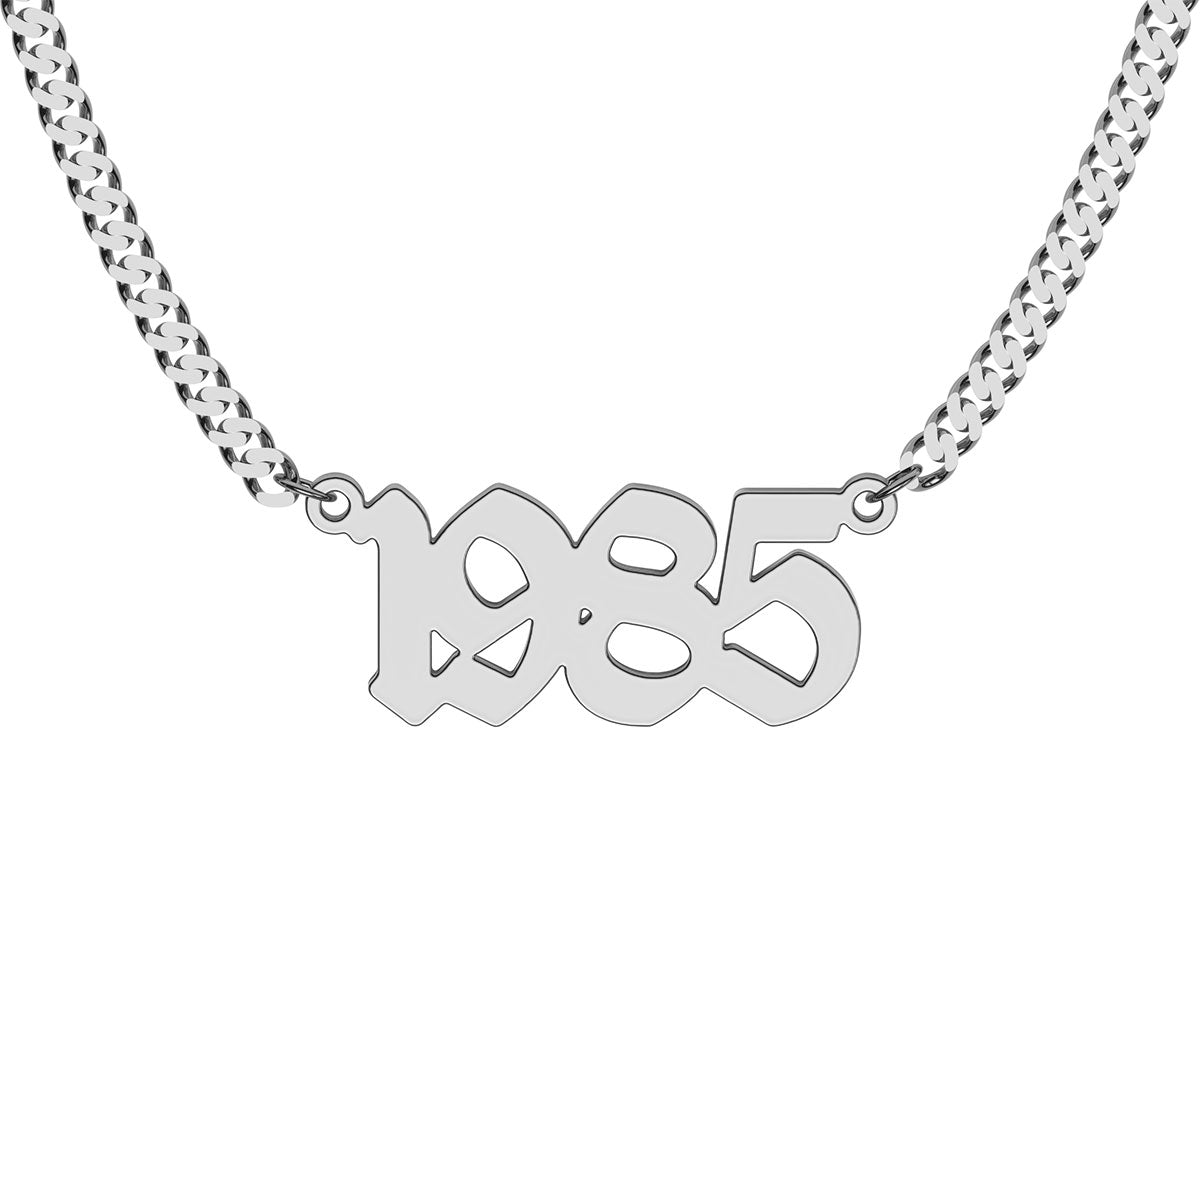 Personalized Year Necklace in Bold Gothic Font